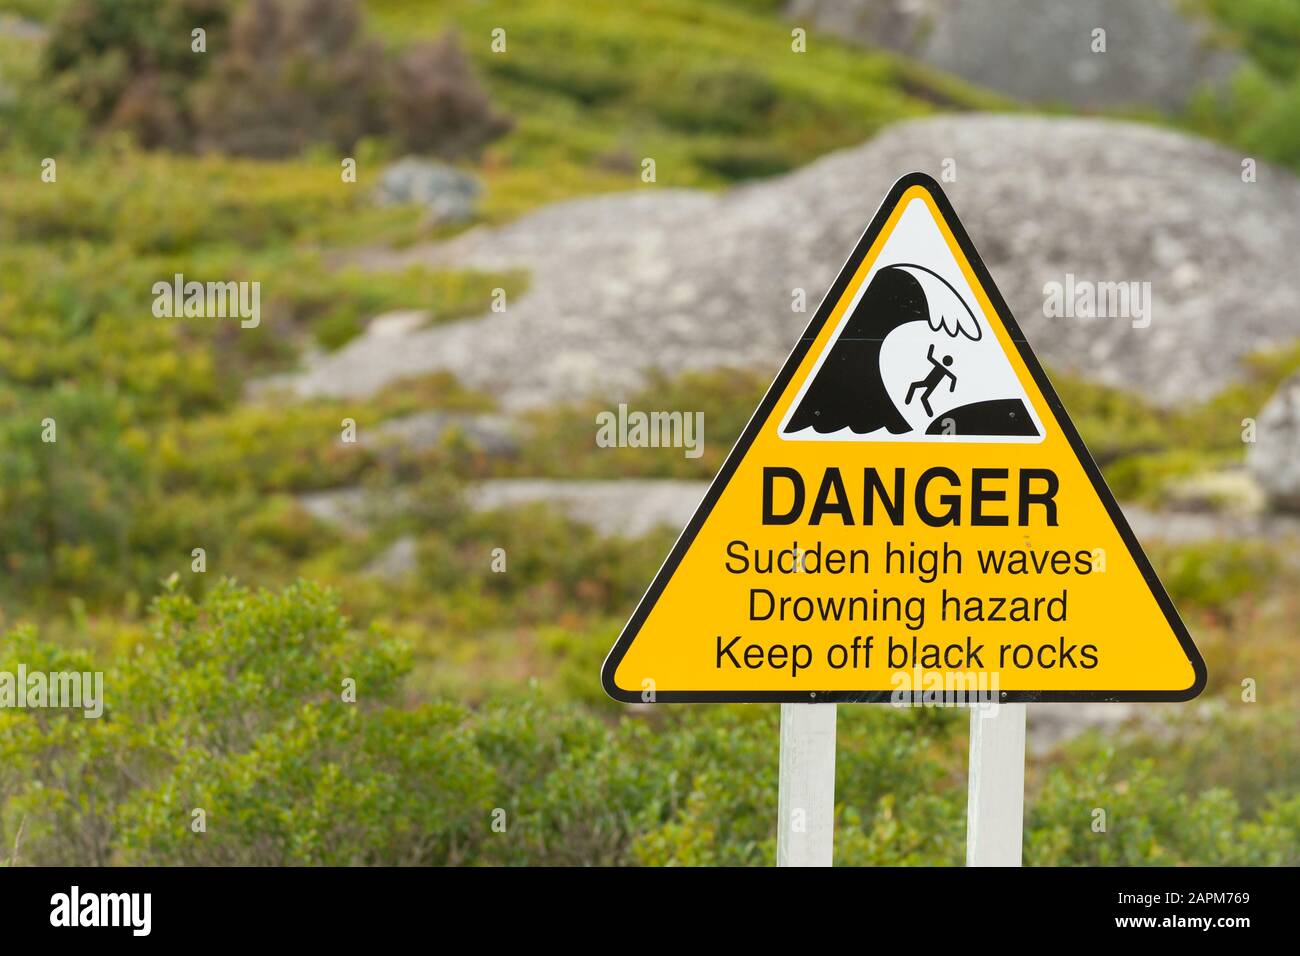 Sign warning about danger of sudden high waves on the Nova Scotia coastline, Canada Stock Photo